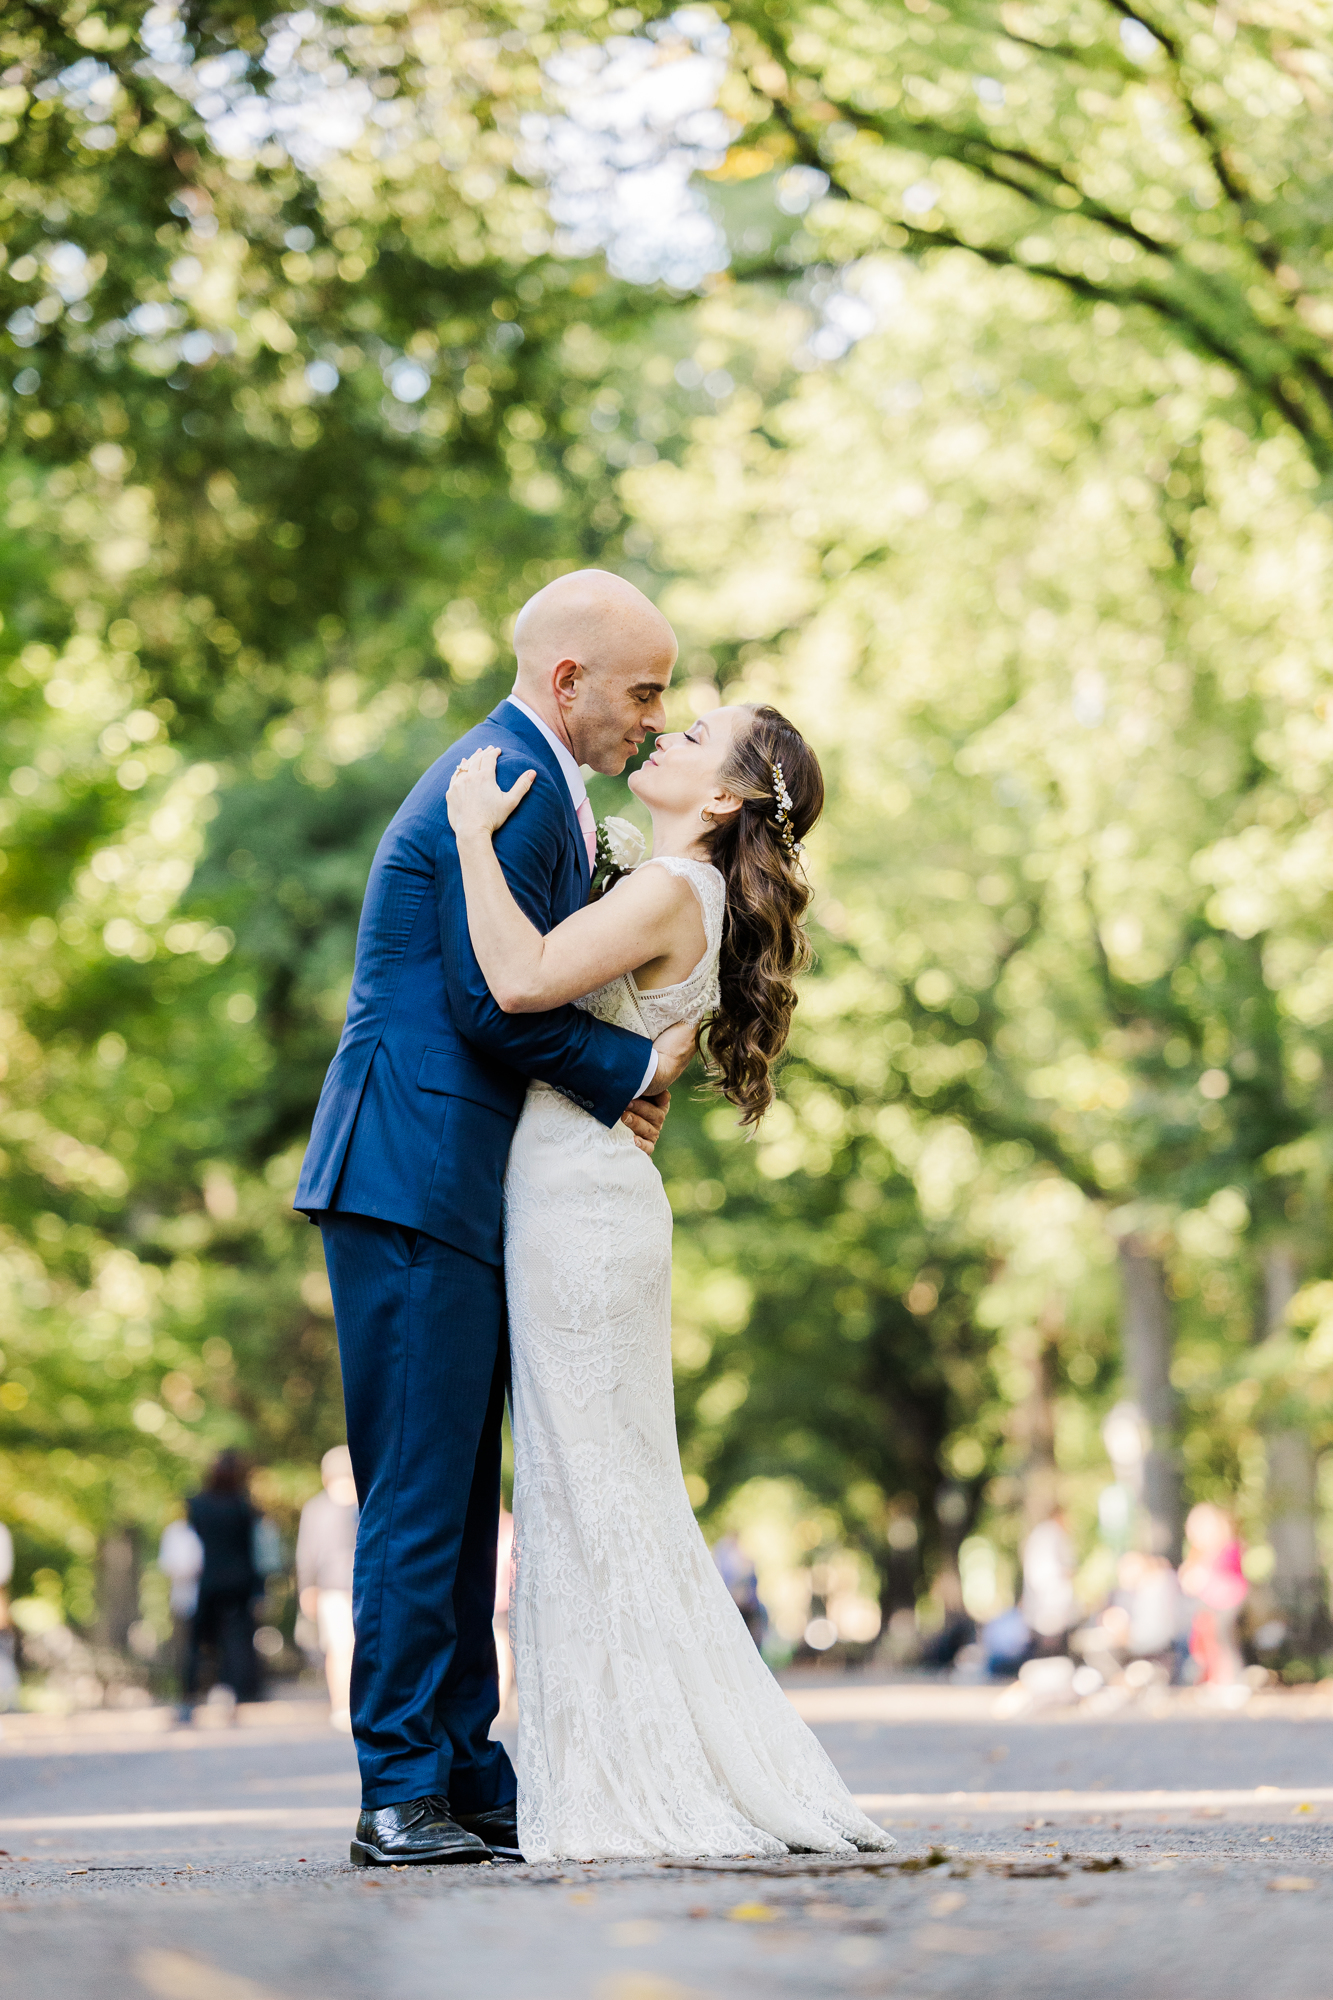 Best Restaurants to Eat at After a Jaw-Dropping Central Park Elopement